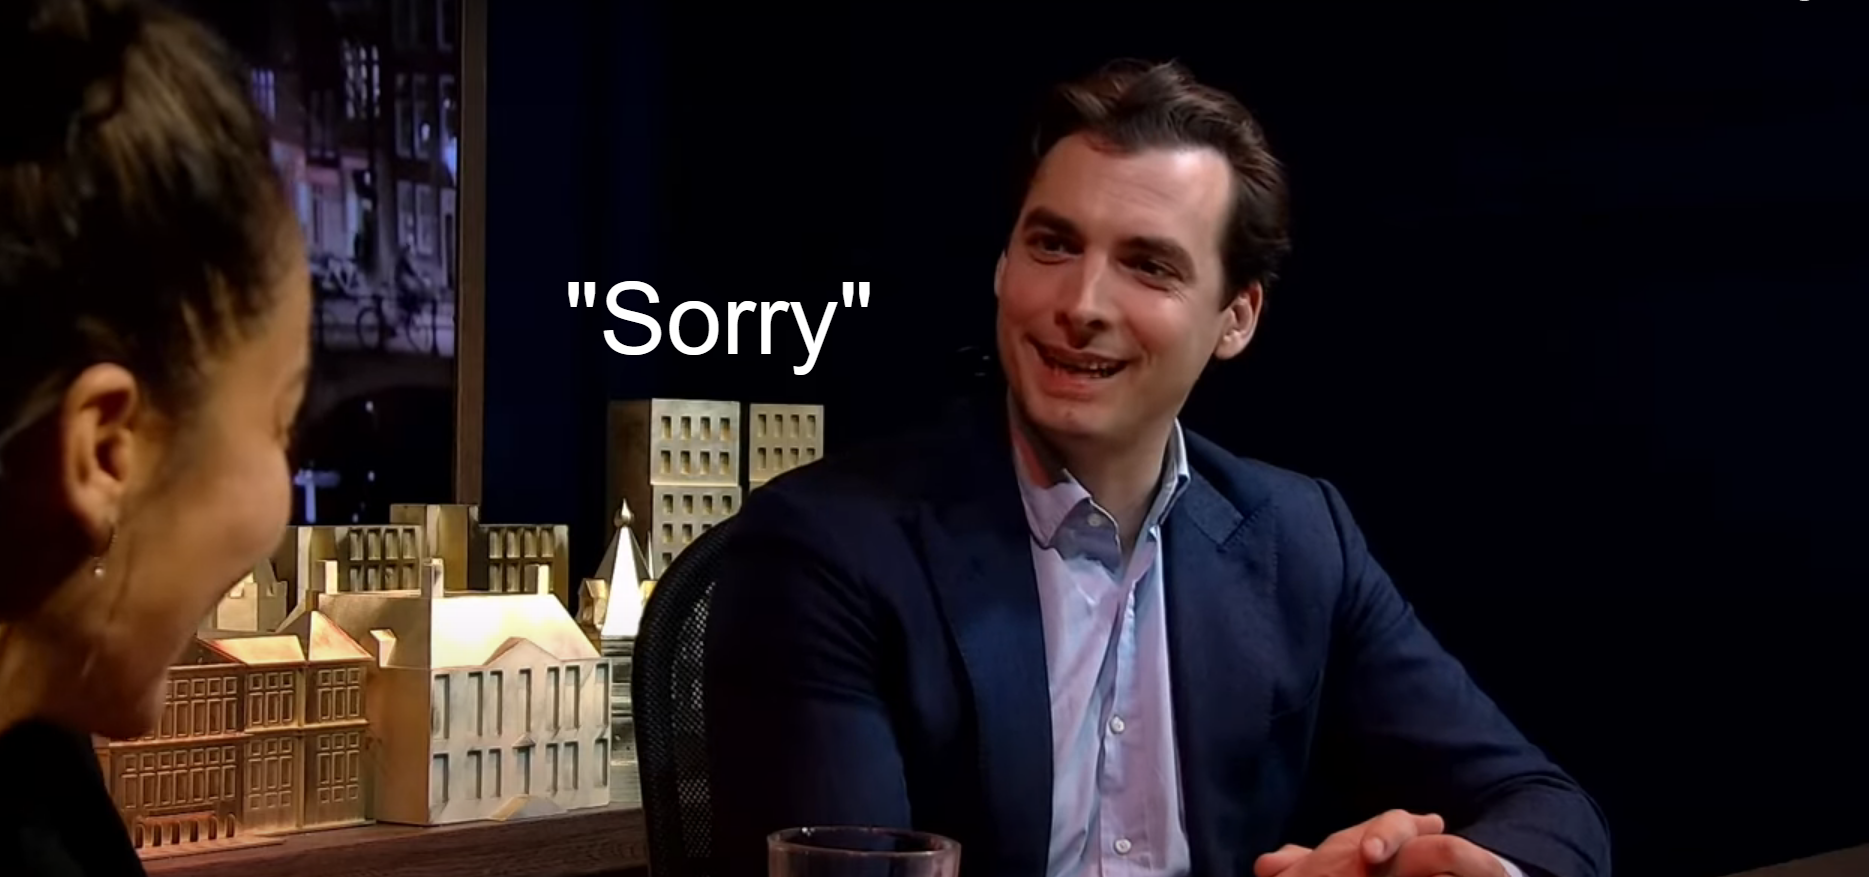 thierry baudet sorry